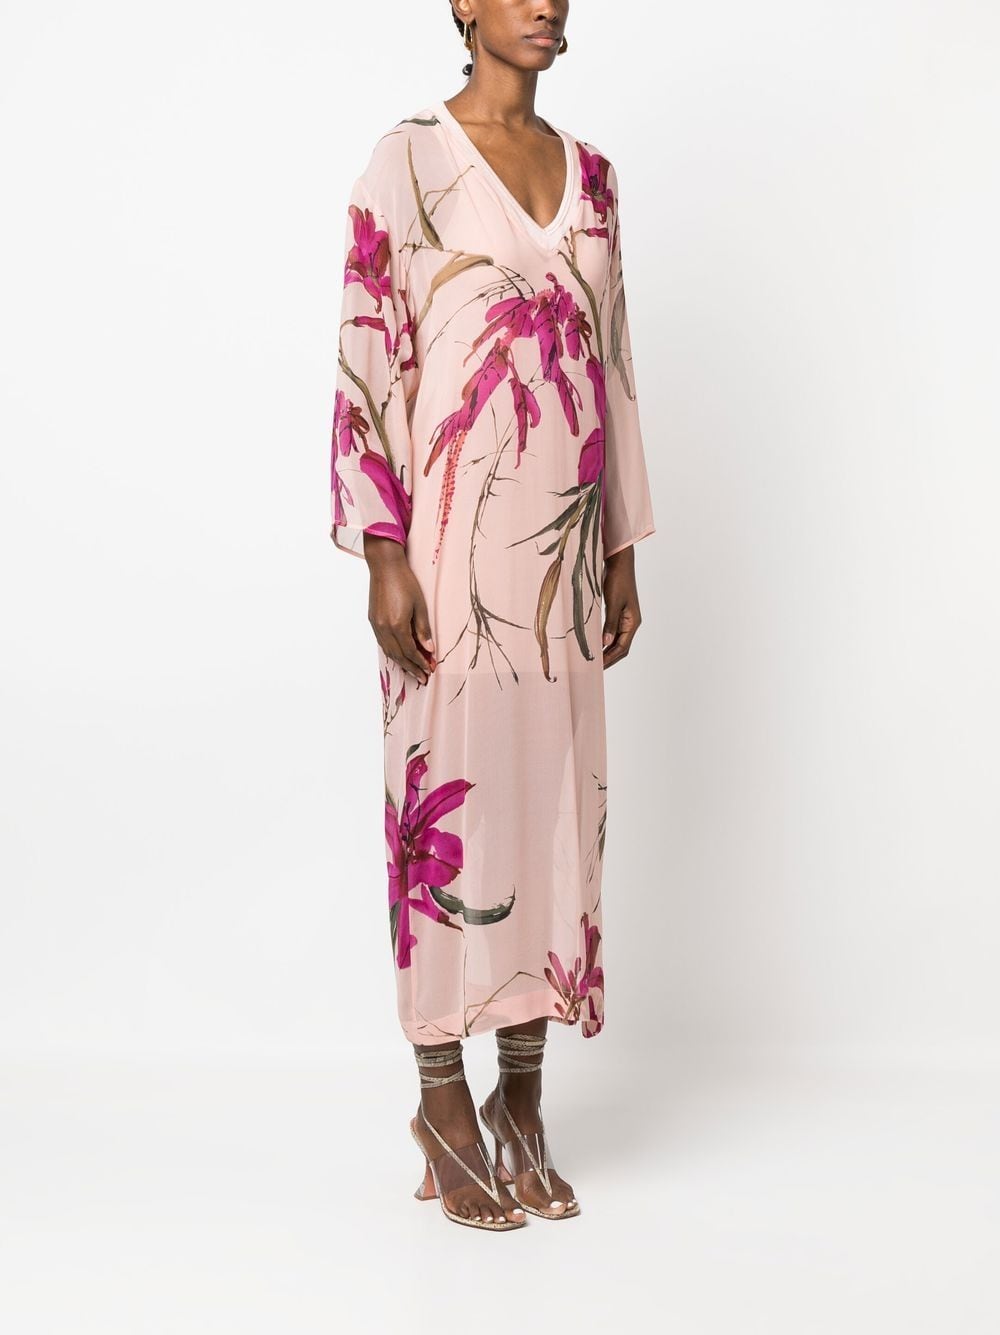 Pre-owned Gianfranco Ferre 1990s Floral Silk Dress In Pink